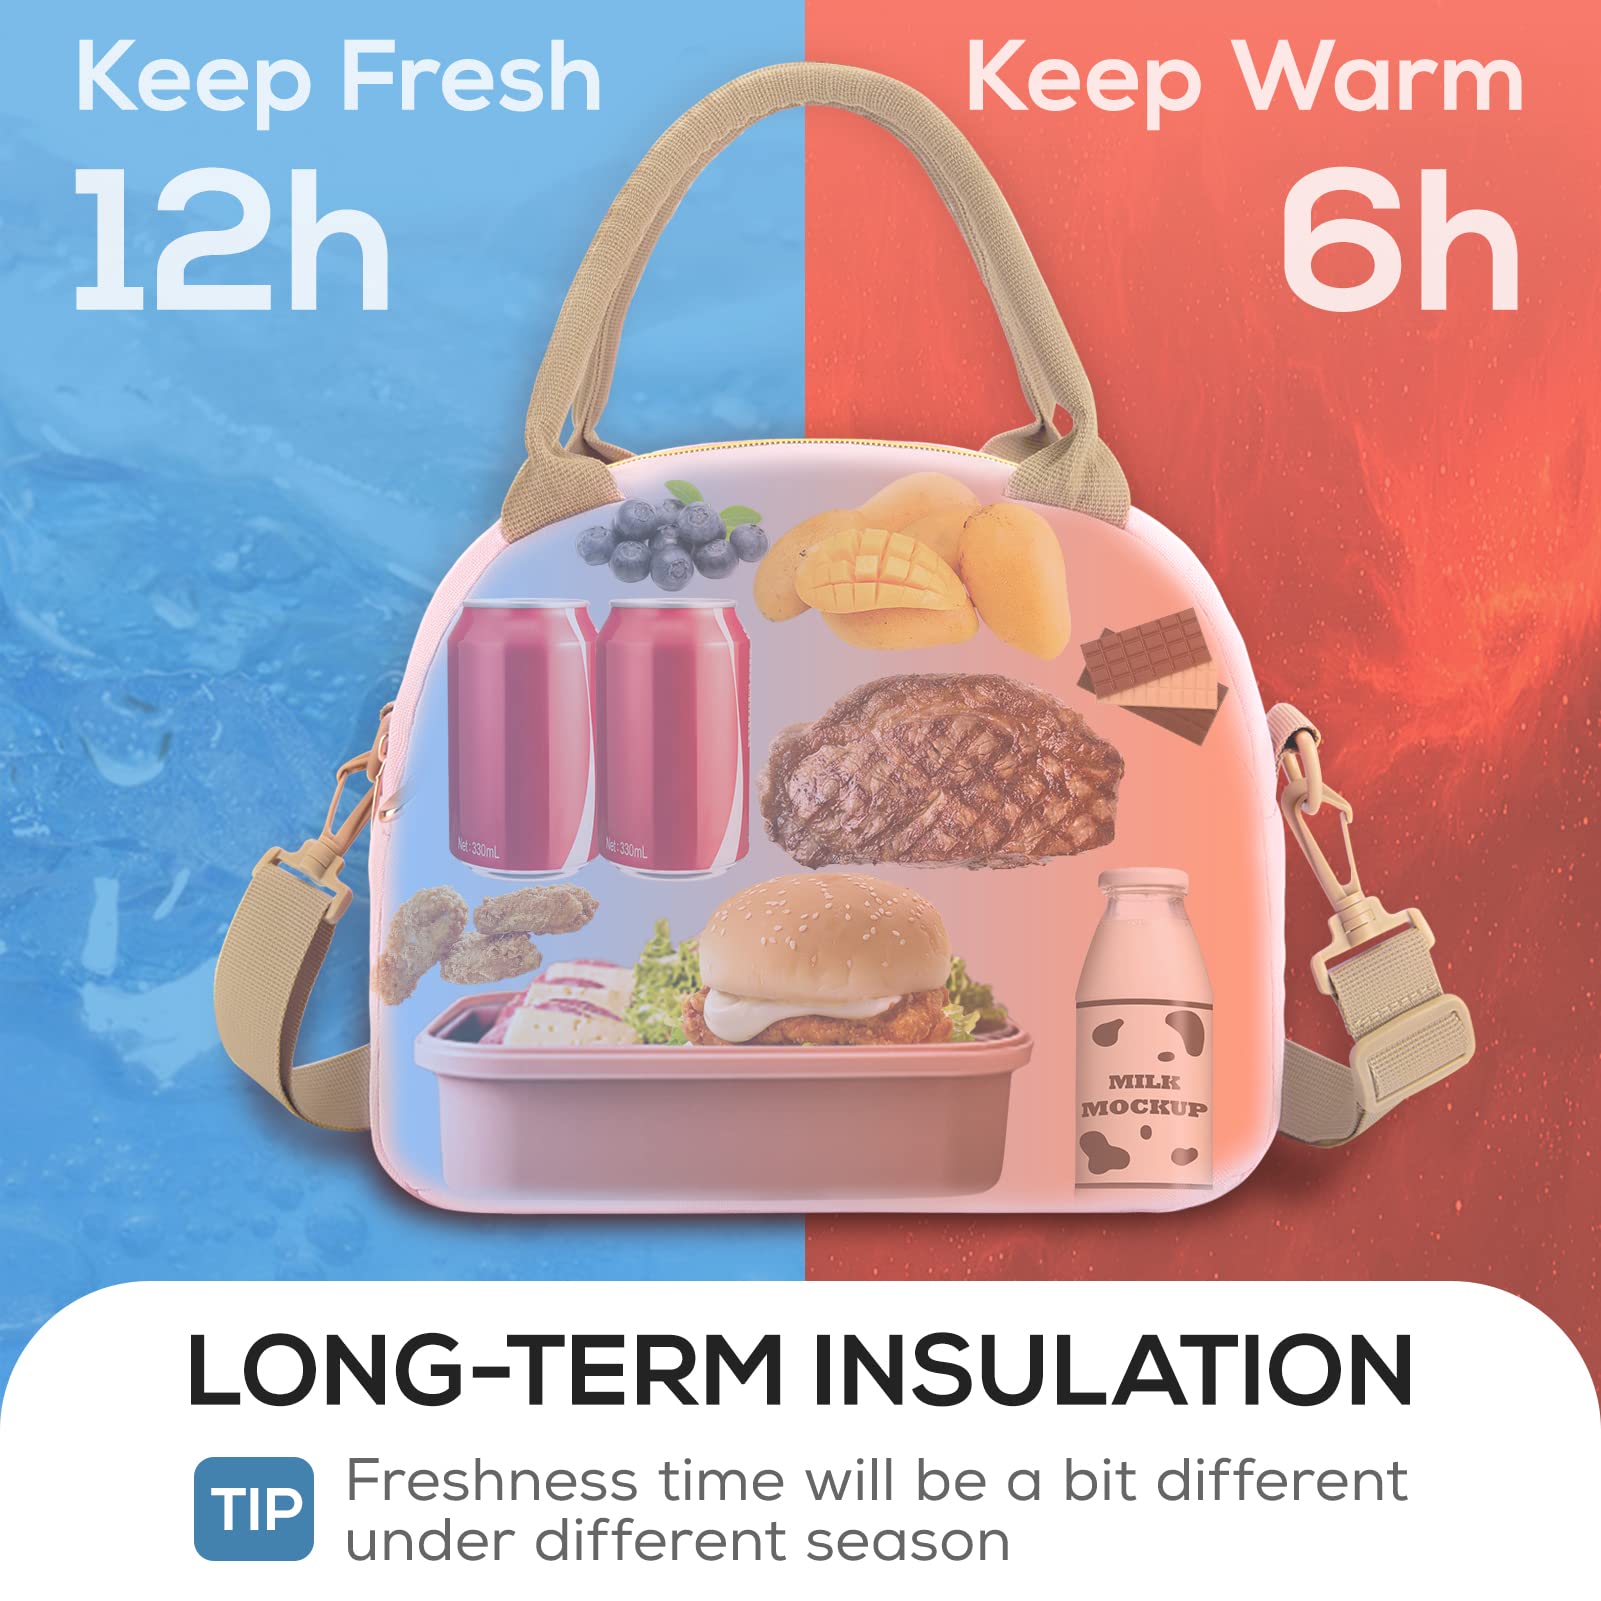 TOURIT Insulated Lunch Box Reusable Lunch Tote Bag, Soft Thermal Cooler Bag Food Container with Adjustable Shoulder Strap for Women Men Kids, Work School Picnic Beach, Hot Pink - image 4 of 8